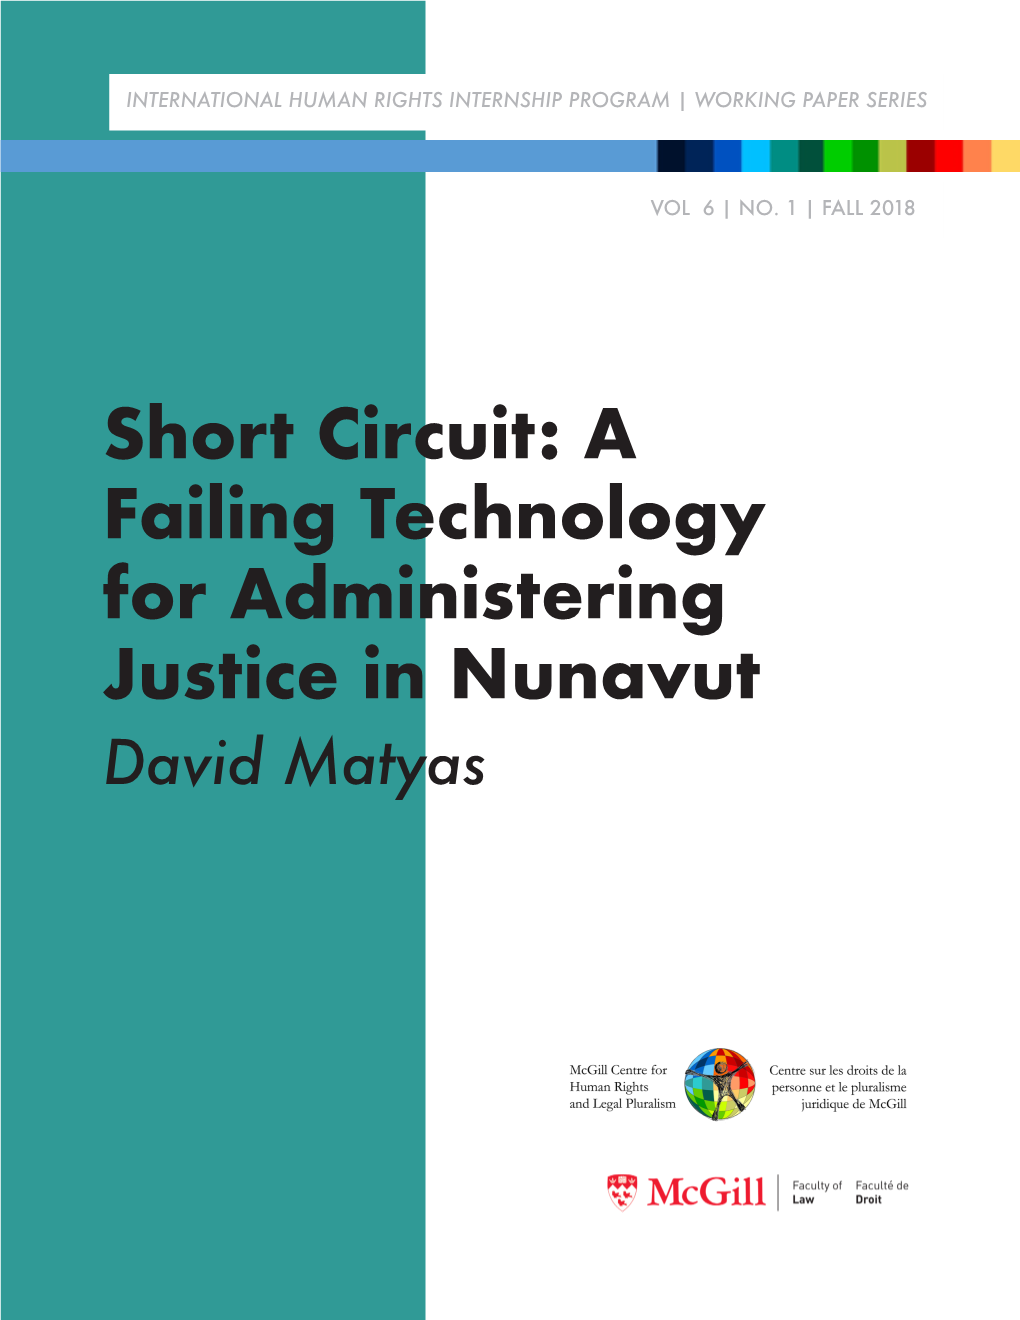 Short Circuit: a Failing Technology for Administering Justice in Nunavut David Matyas ABOUT CHRLP